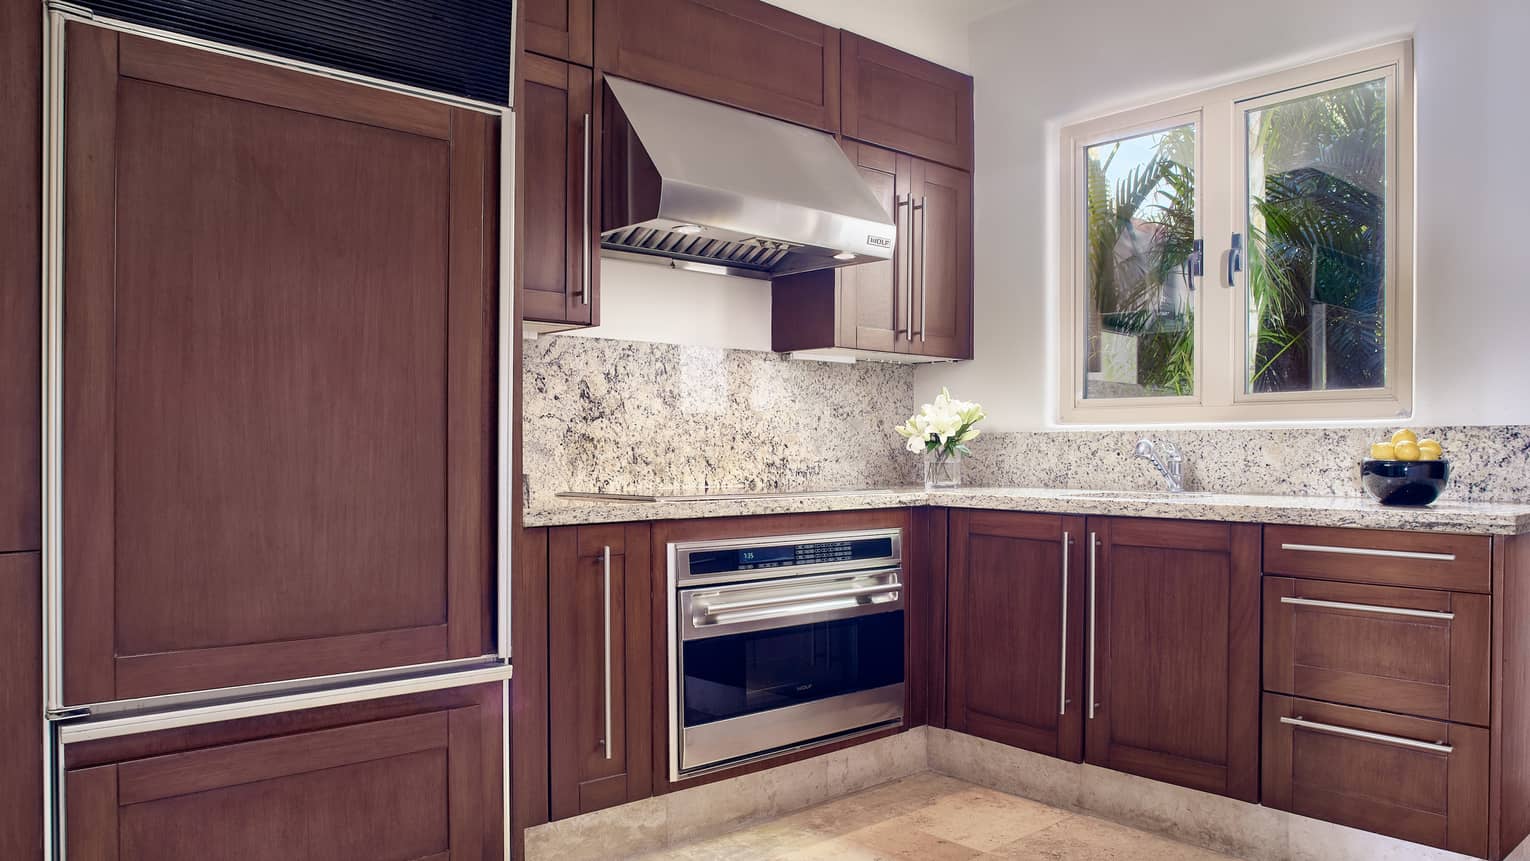 Arena Beach House kitchen with wood cabinetry, marble countertops, window